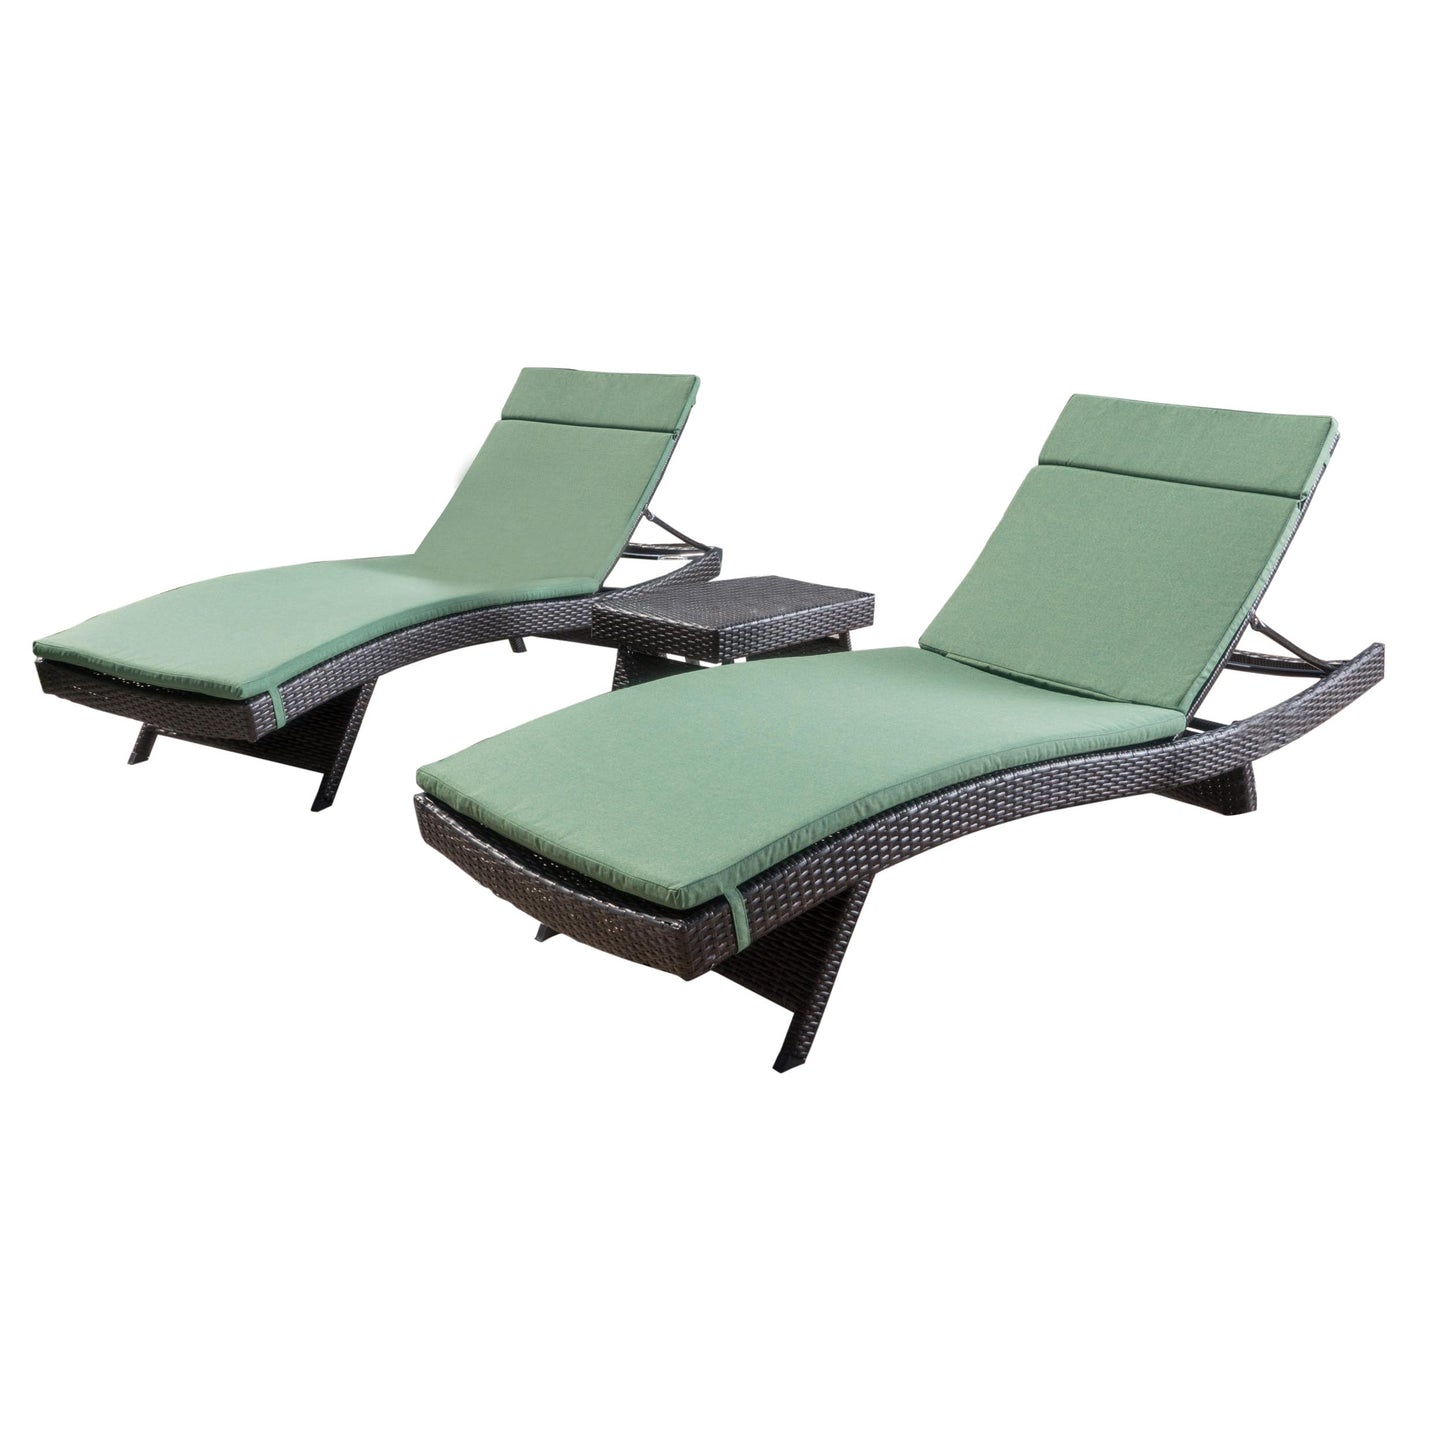 Lakeport 3pc Outdoor Brown Wicker Chaise Lounge Chair & Table Set